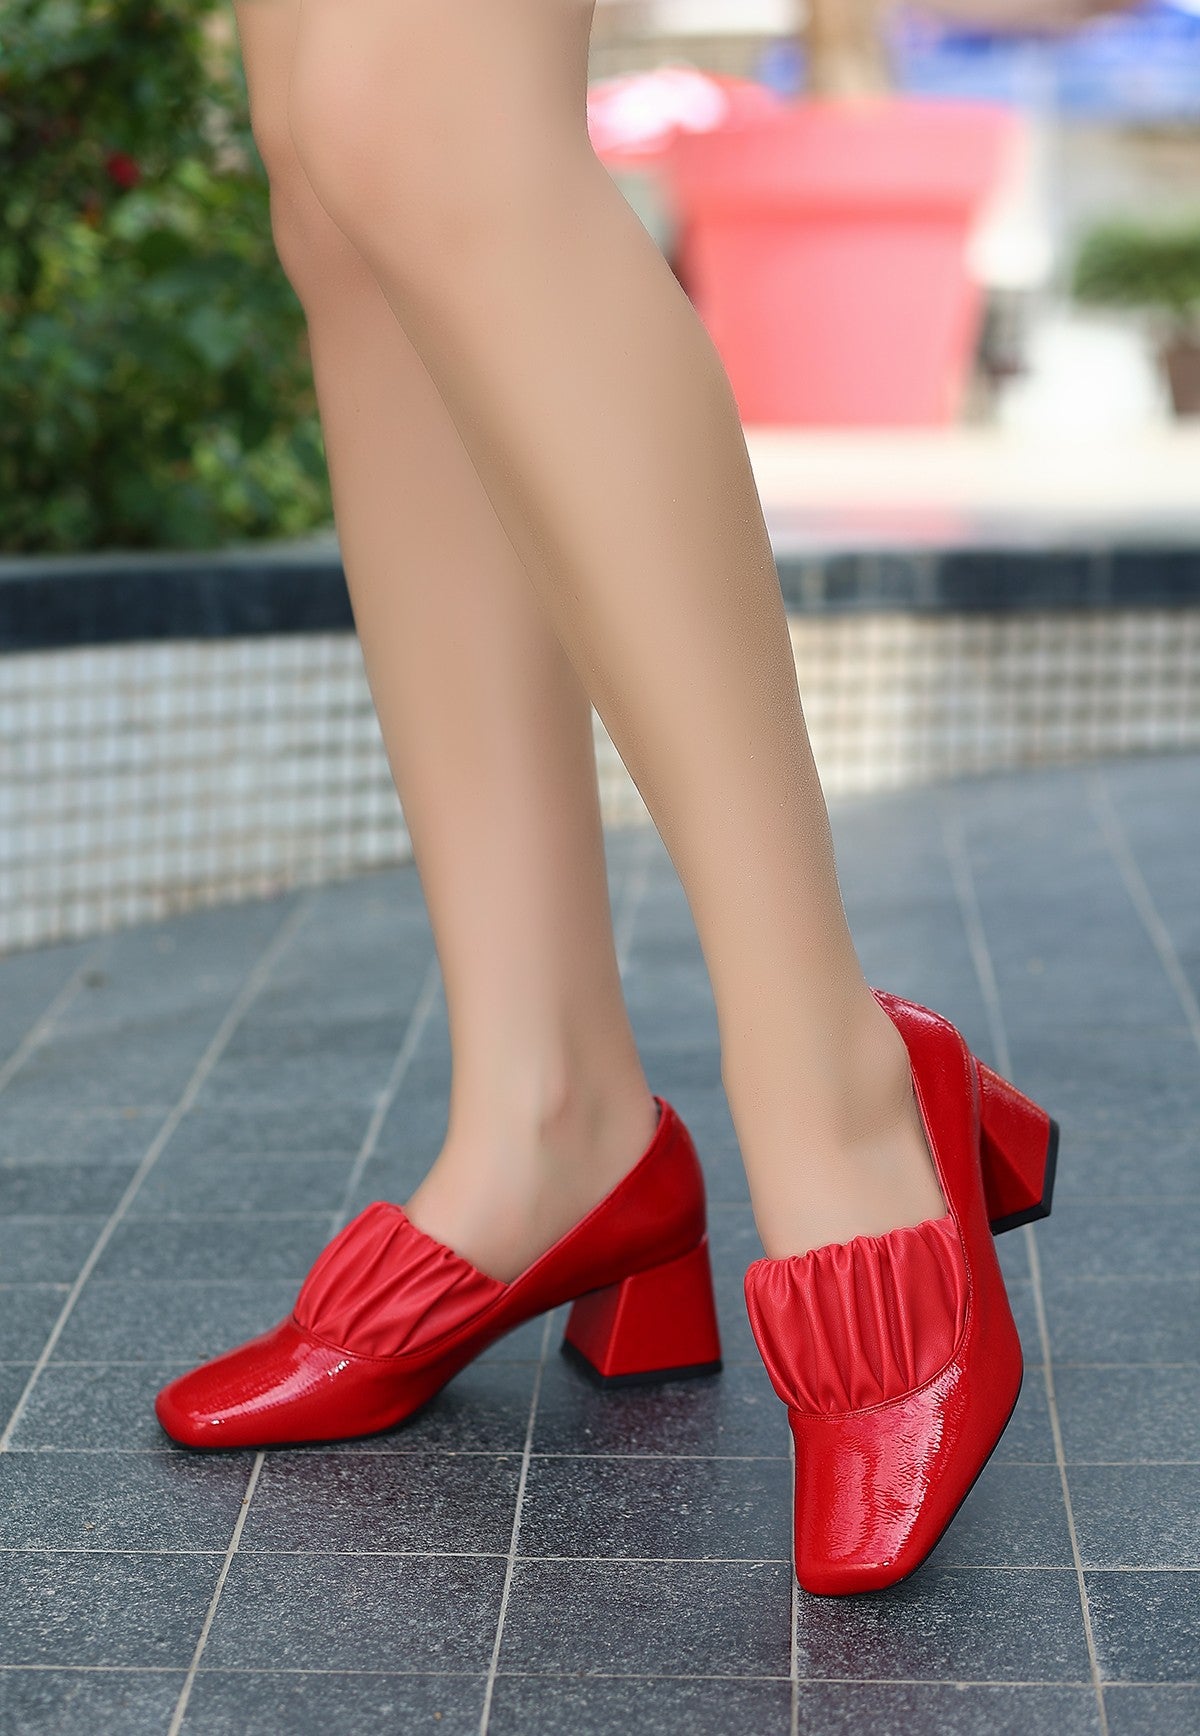 Women's Red Patent Leather Heeled Shoes - STREETMODE™